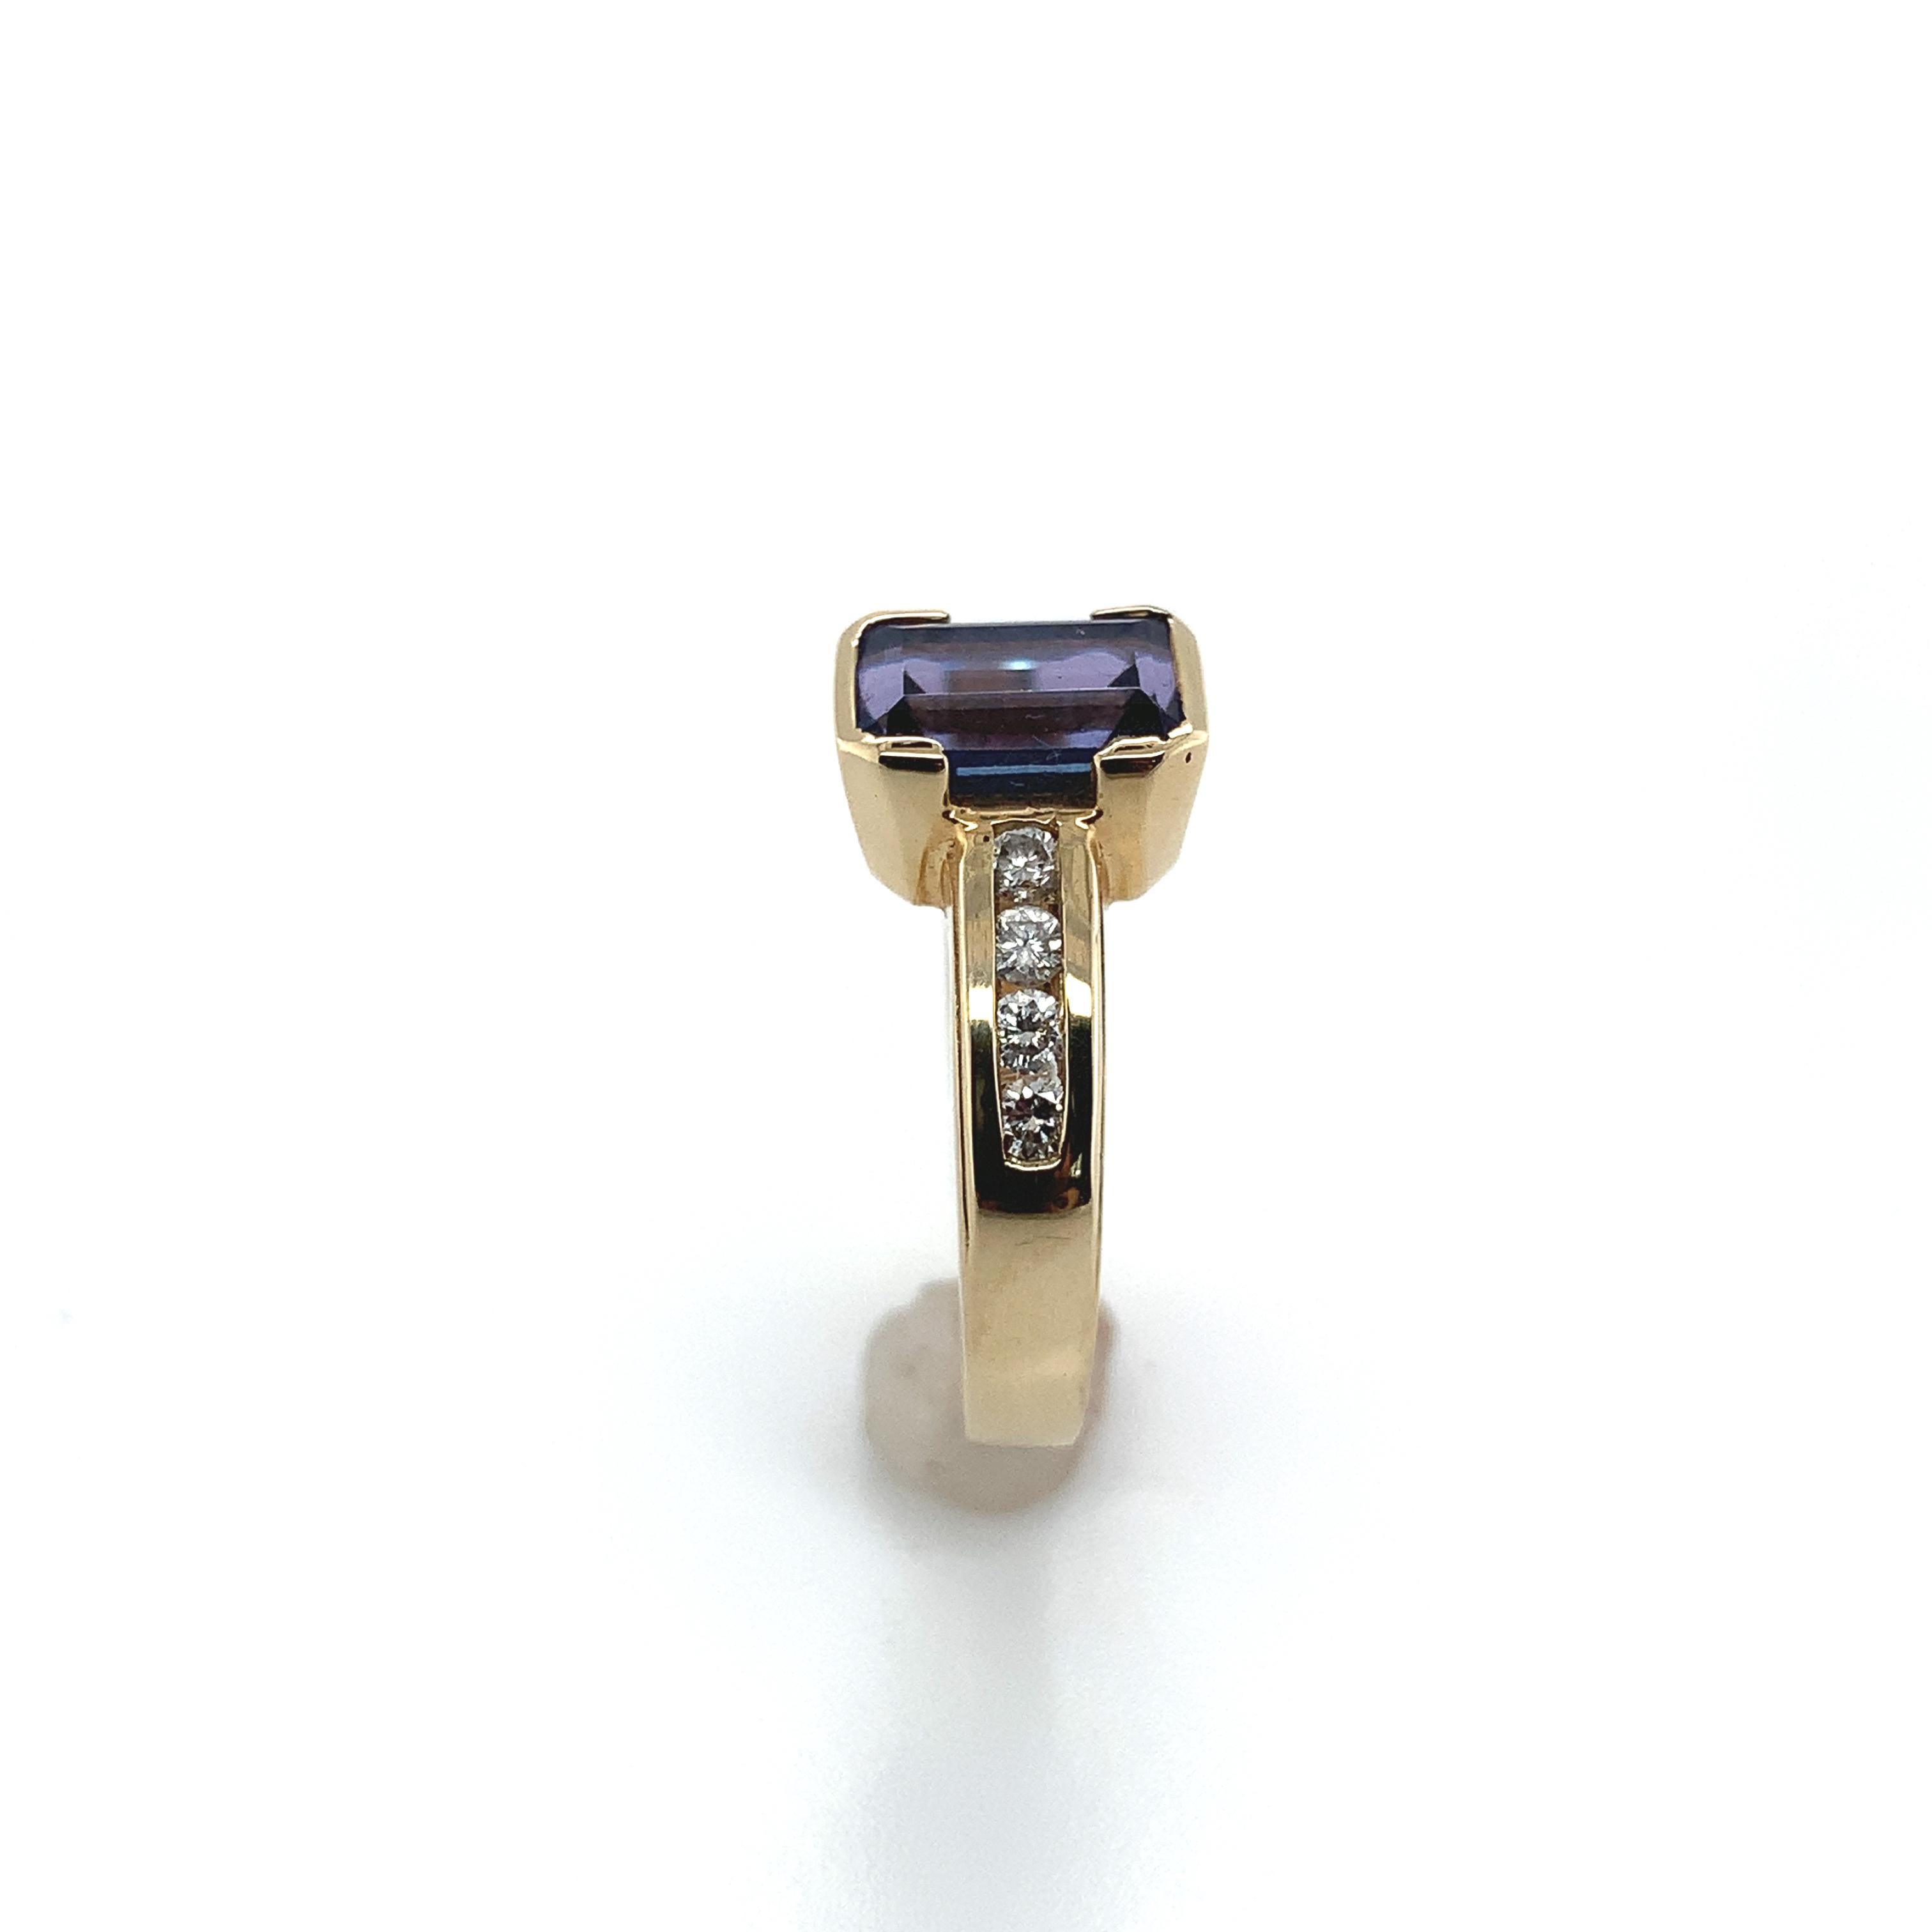 14k Yellow Gold 2.17ct Emerald Cut Genuine Natural Tanzanite Ring (#J1840)

14k yellow gold tanzanite and diamond ring featuring an emerald cut 2.17 carat tanzanite and eight round brilliant cut diamonds weighing .25ct total weight. The tanzanite is